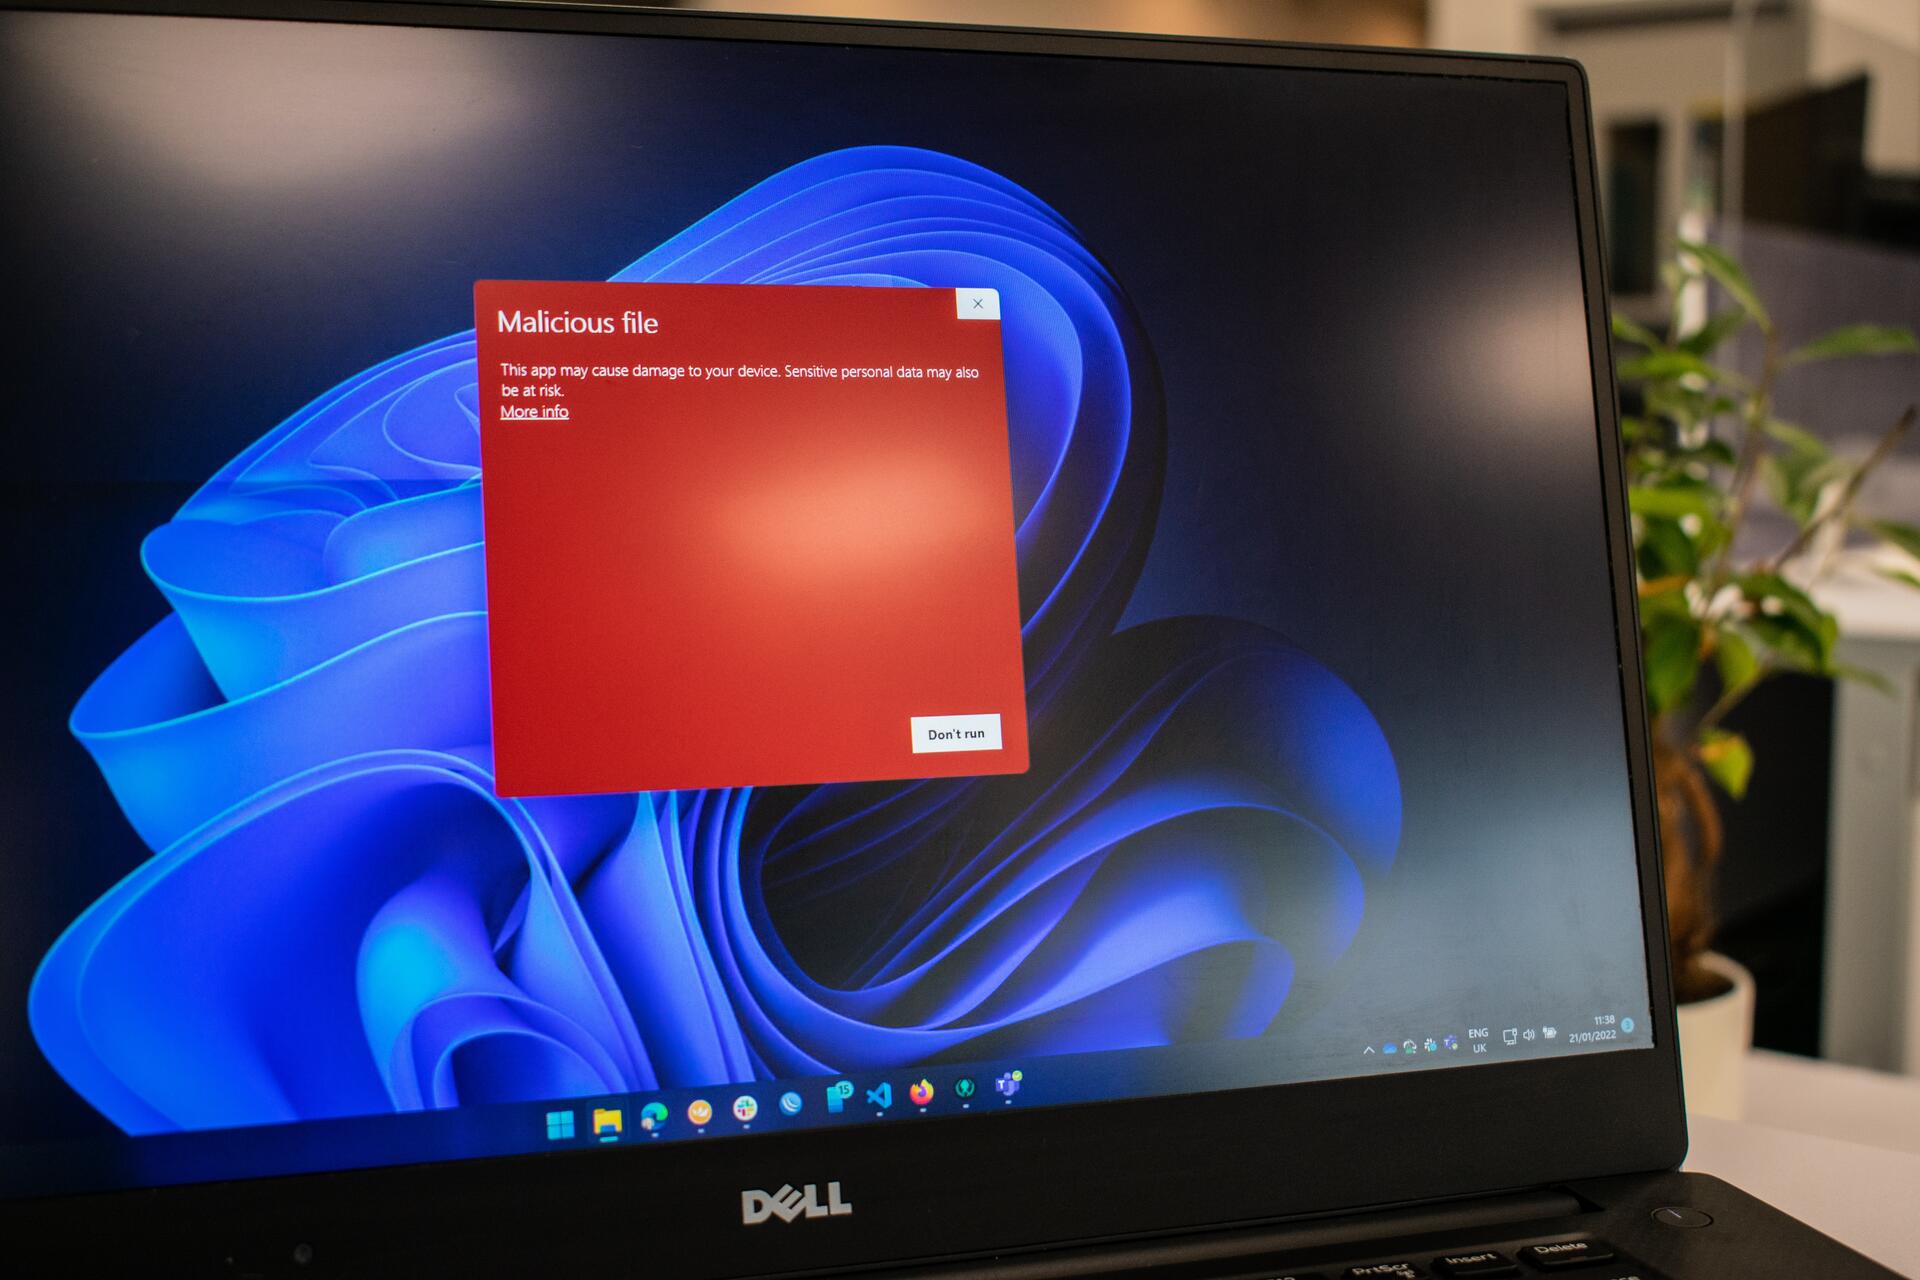 Windows includes built-in ransomware protection. Here’s how to turn it on